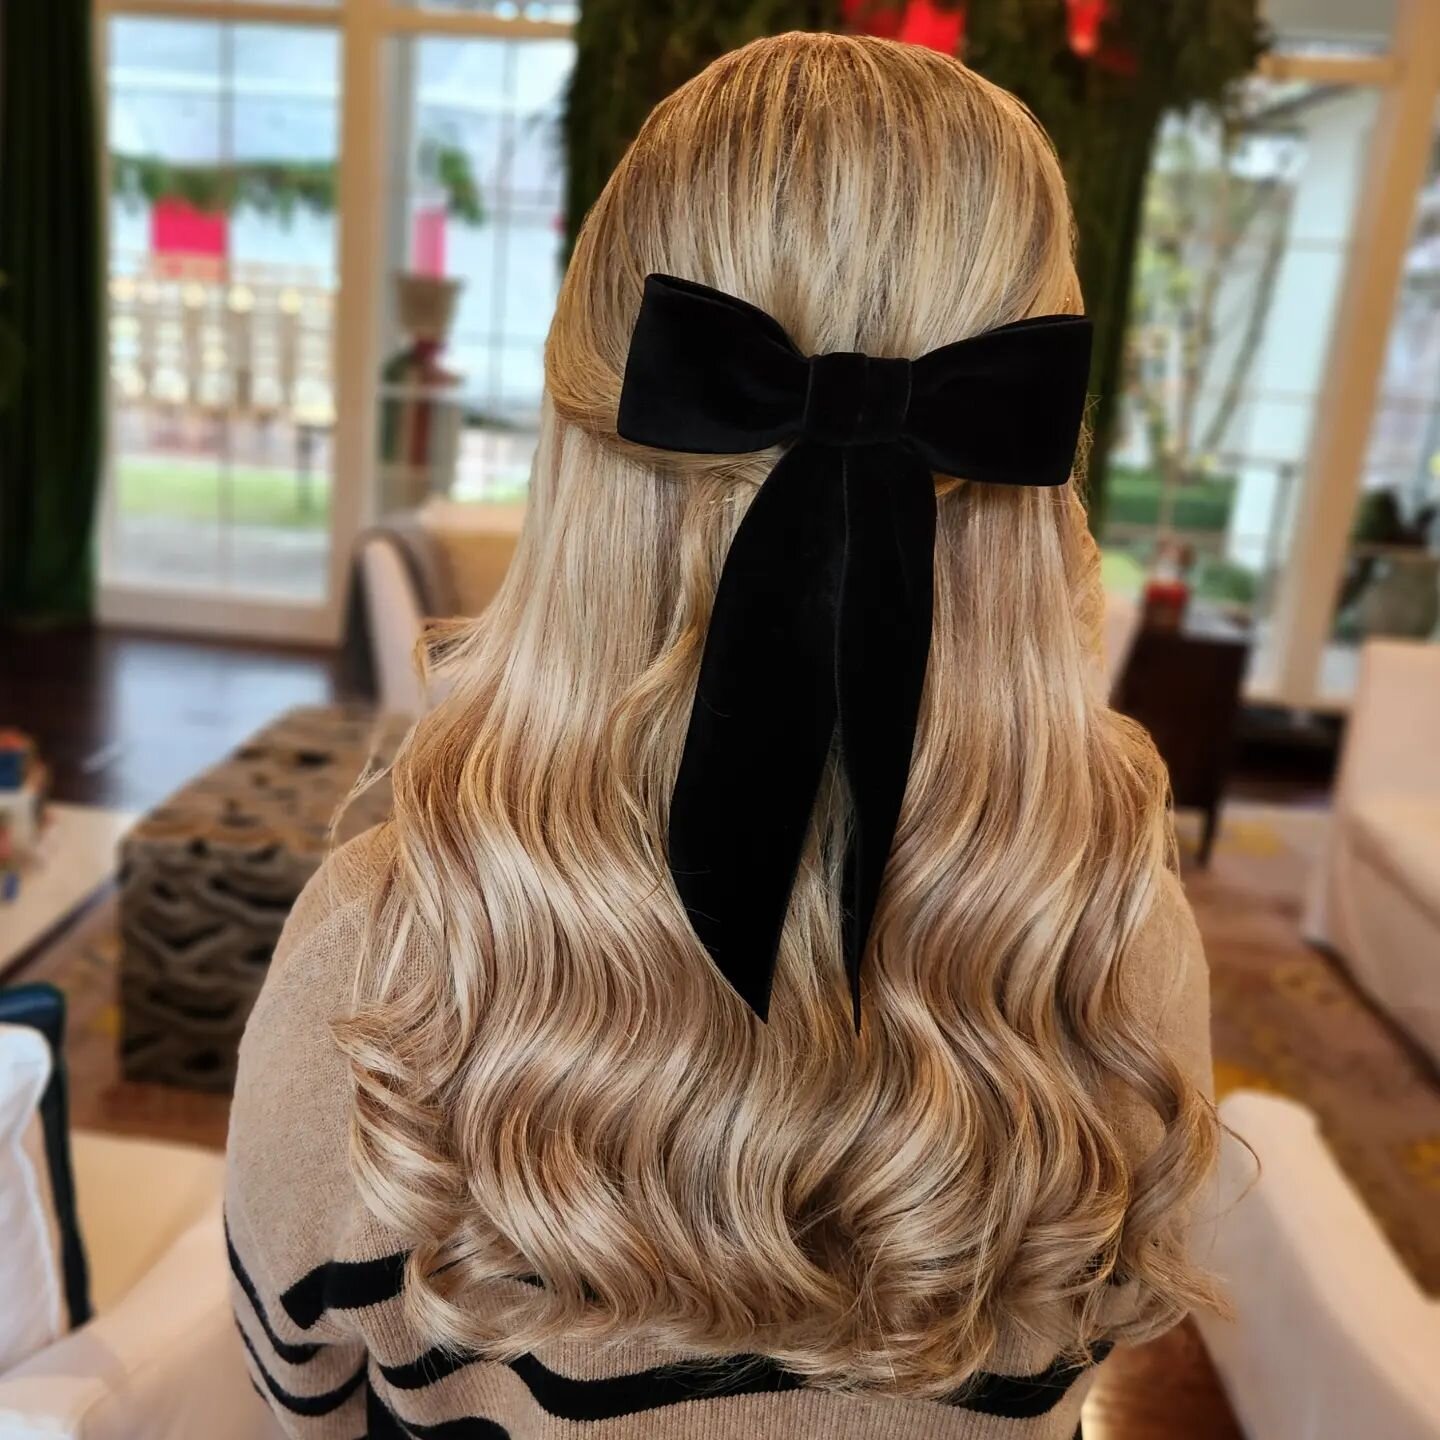 I cannot get over these BOWS!!! Im OBSESSED!!! 

ALSO,  can we just take a moment  admire these wavessssssss! 

Call/book 
225-341-2722